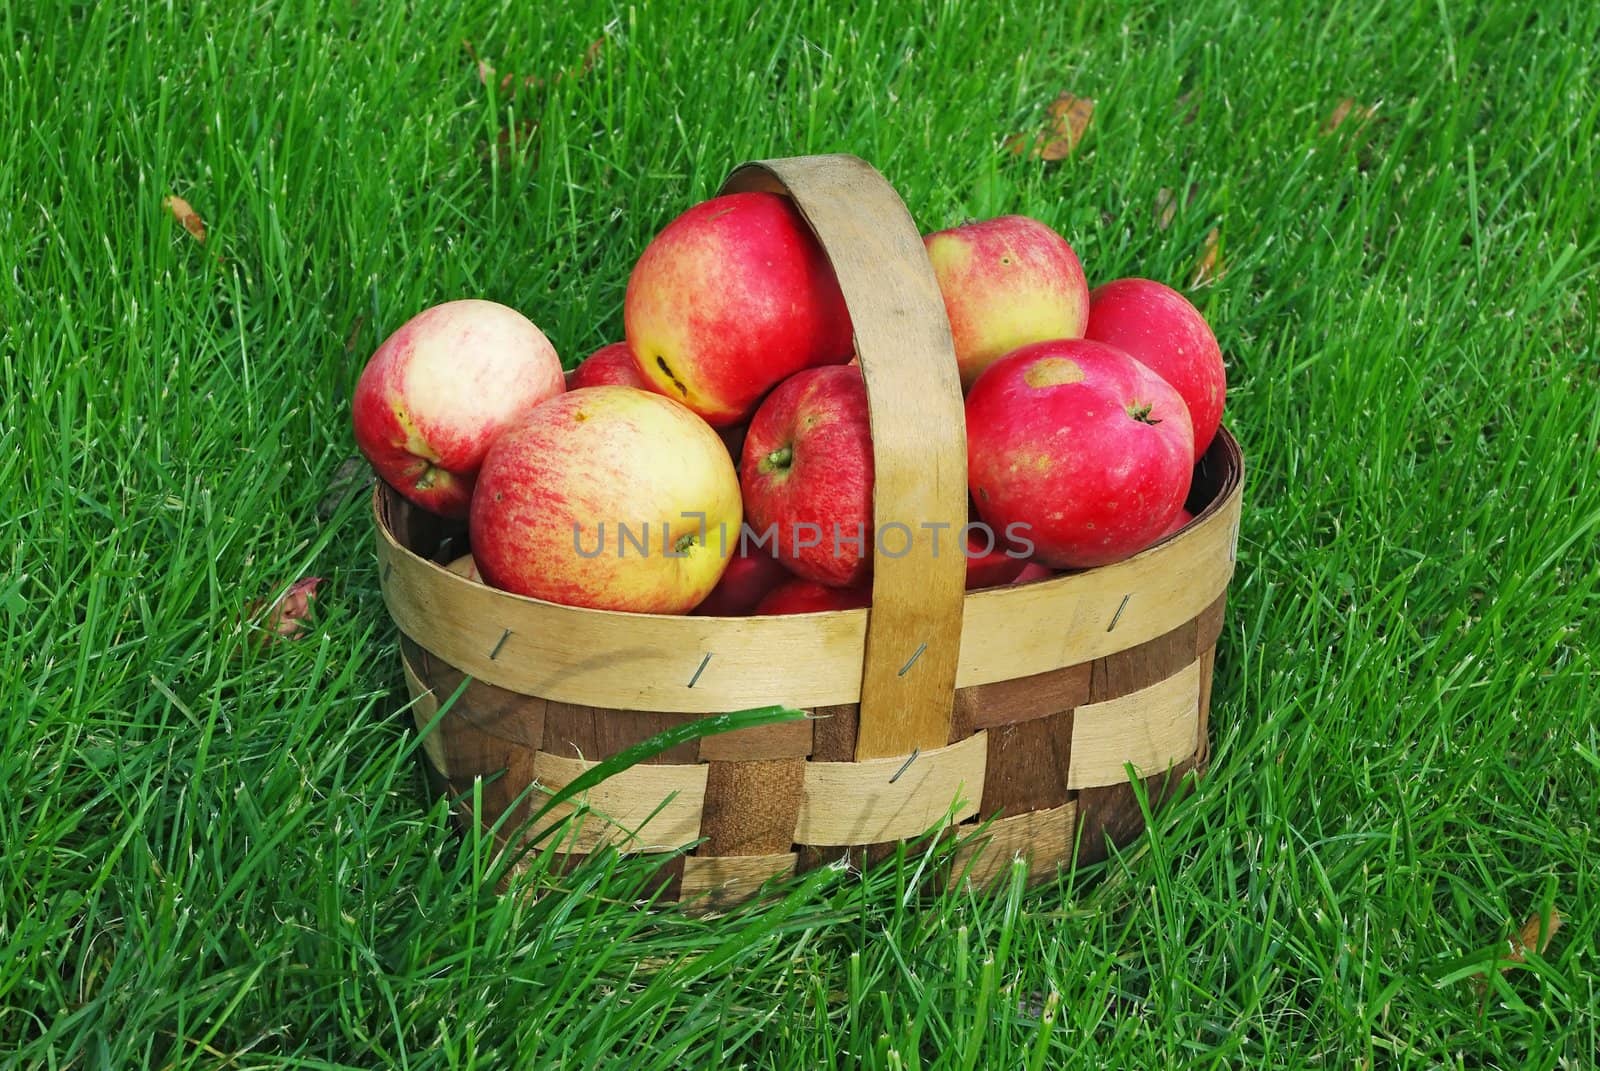 small wooden basket of freshly picked apples on lawn